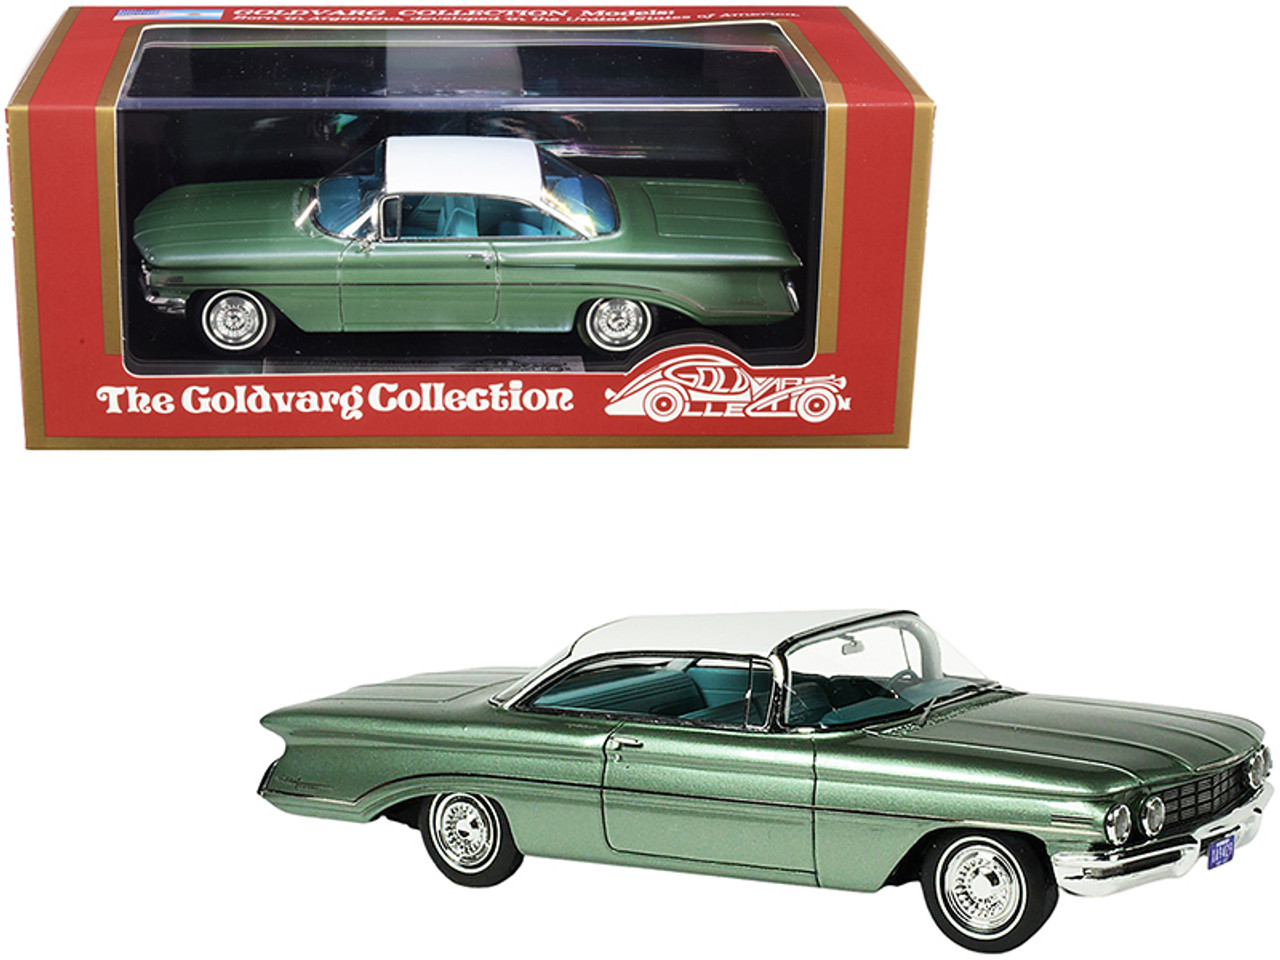 1960 Oldsmobile Fern Green Mist Metallic with White Top Limited Edition to 220 pieces Worldwide 1/43 Model Car by Goldvarg Collection